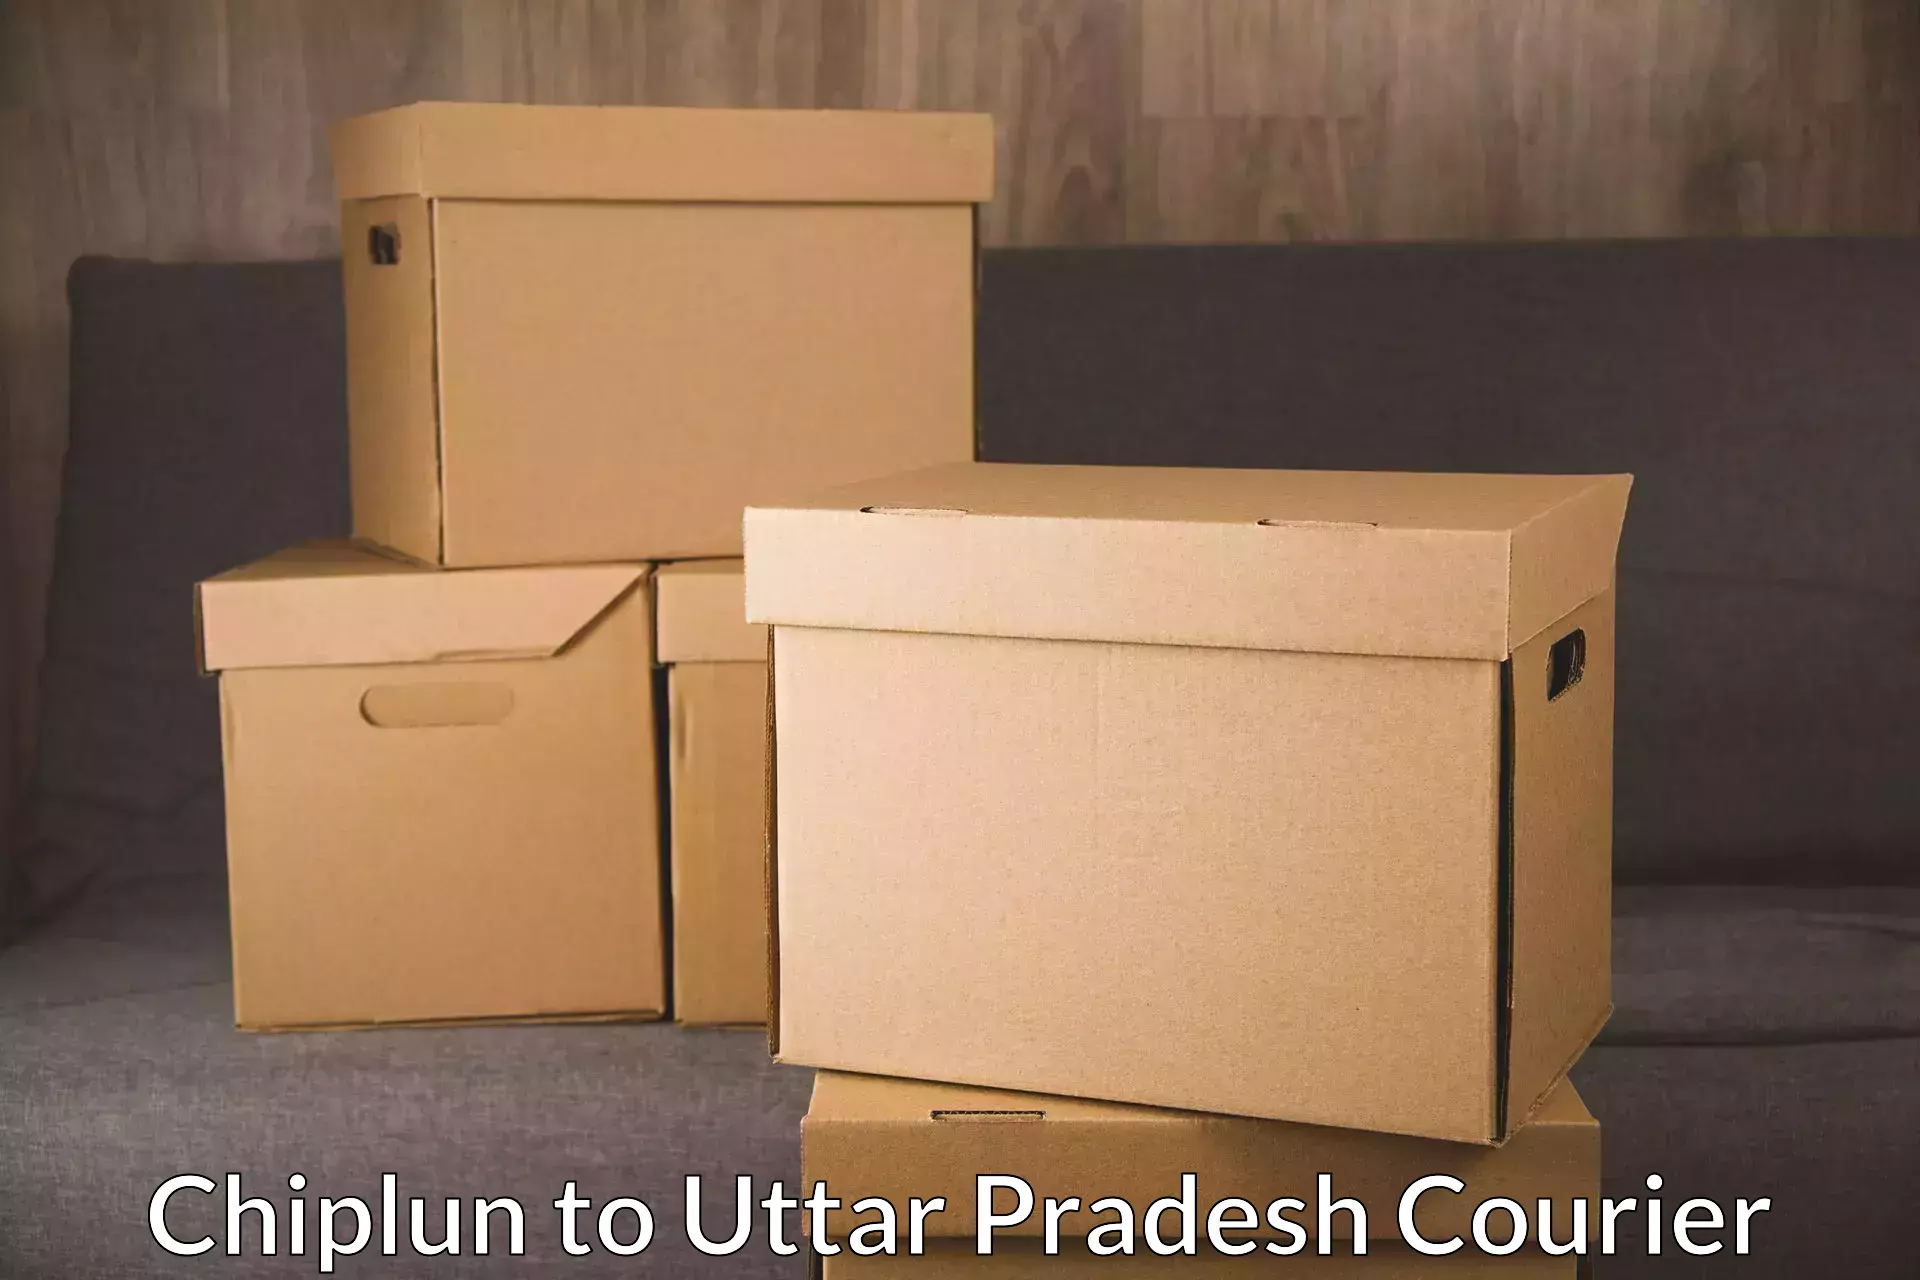 Discounted shipping Chiplun to Lucknow